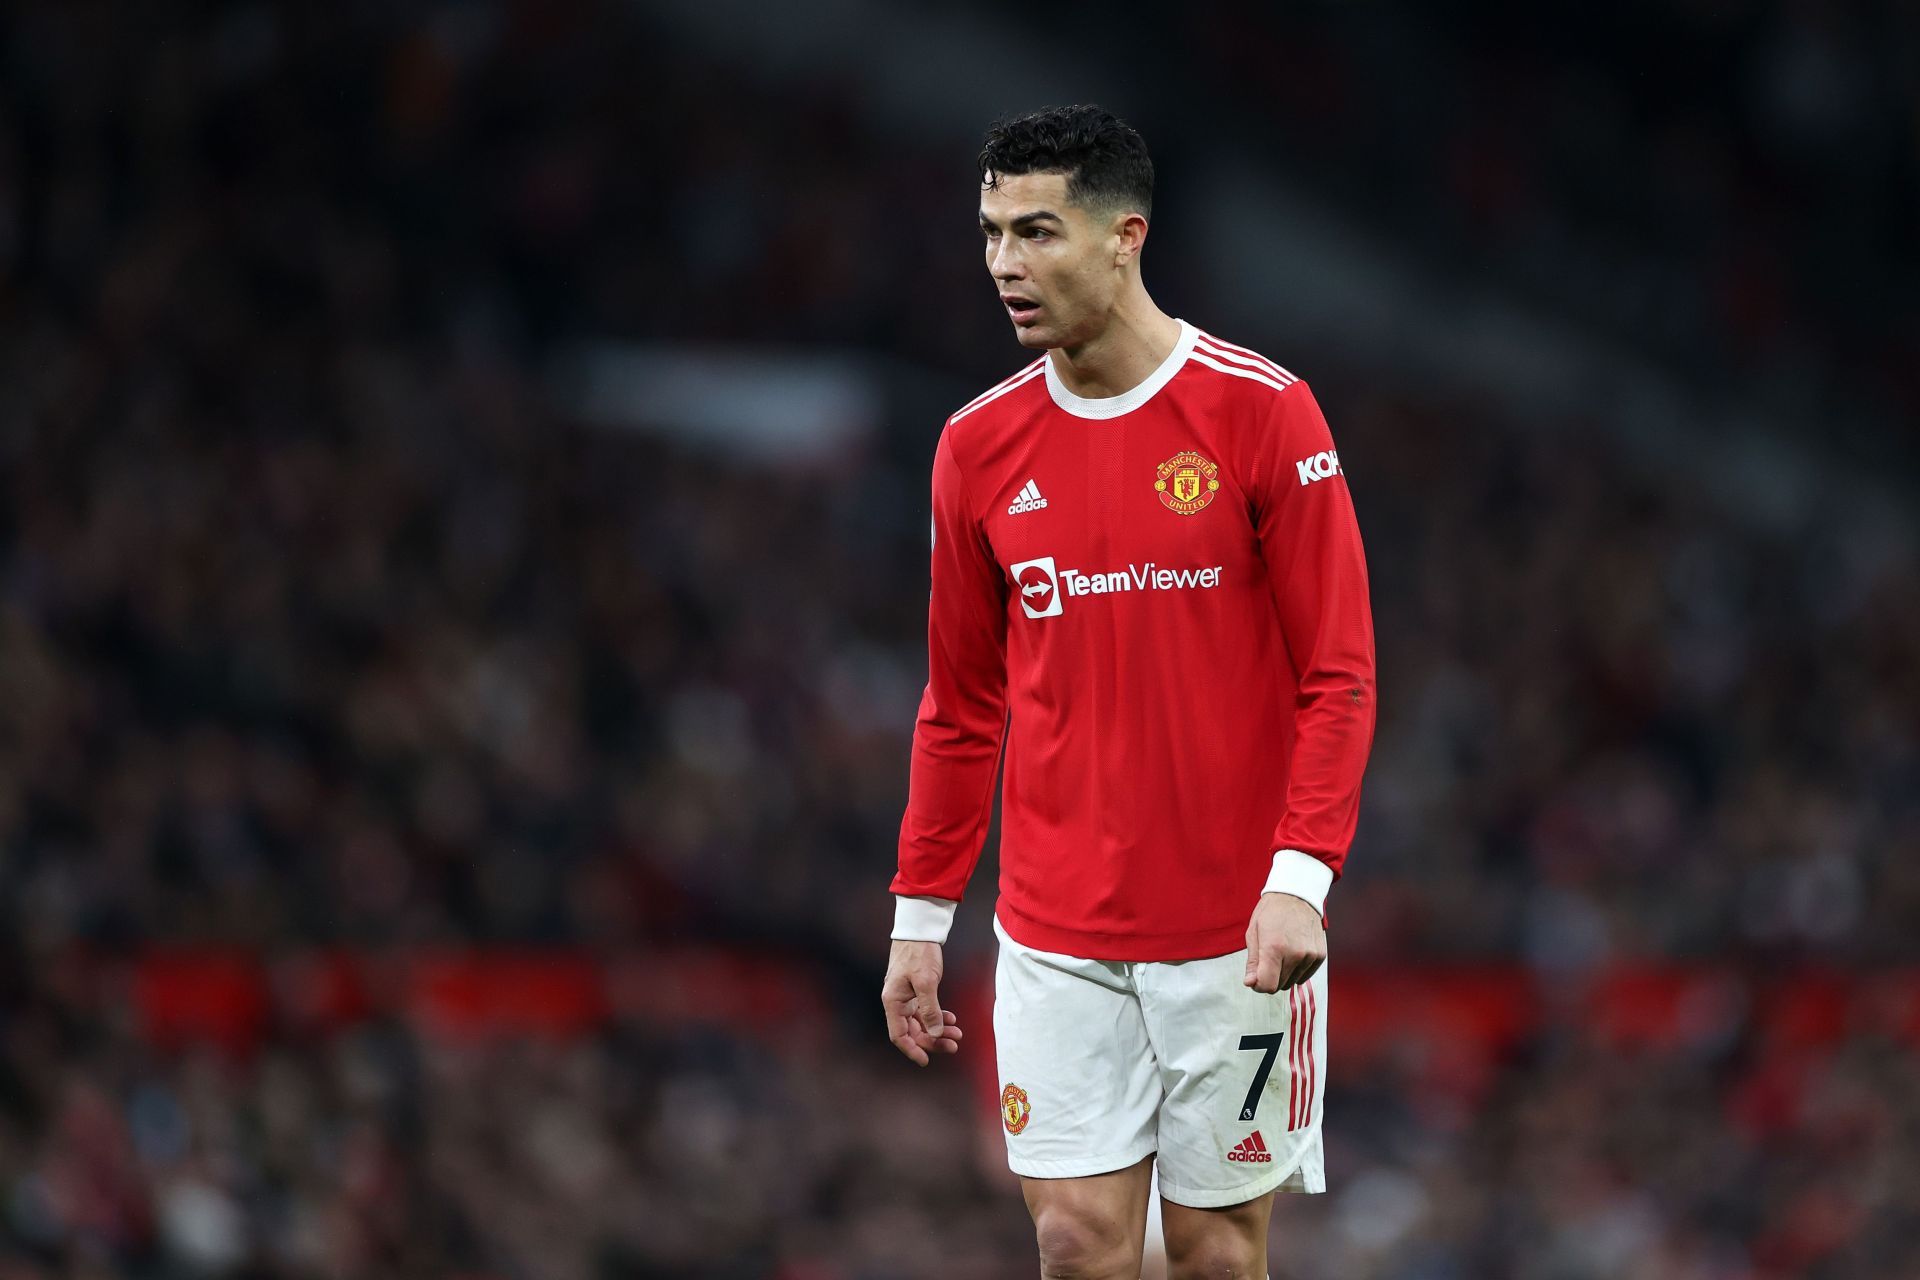 Cristiano Ronaldo completed a sensational return to Manchester United in 2021